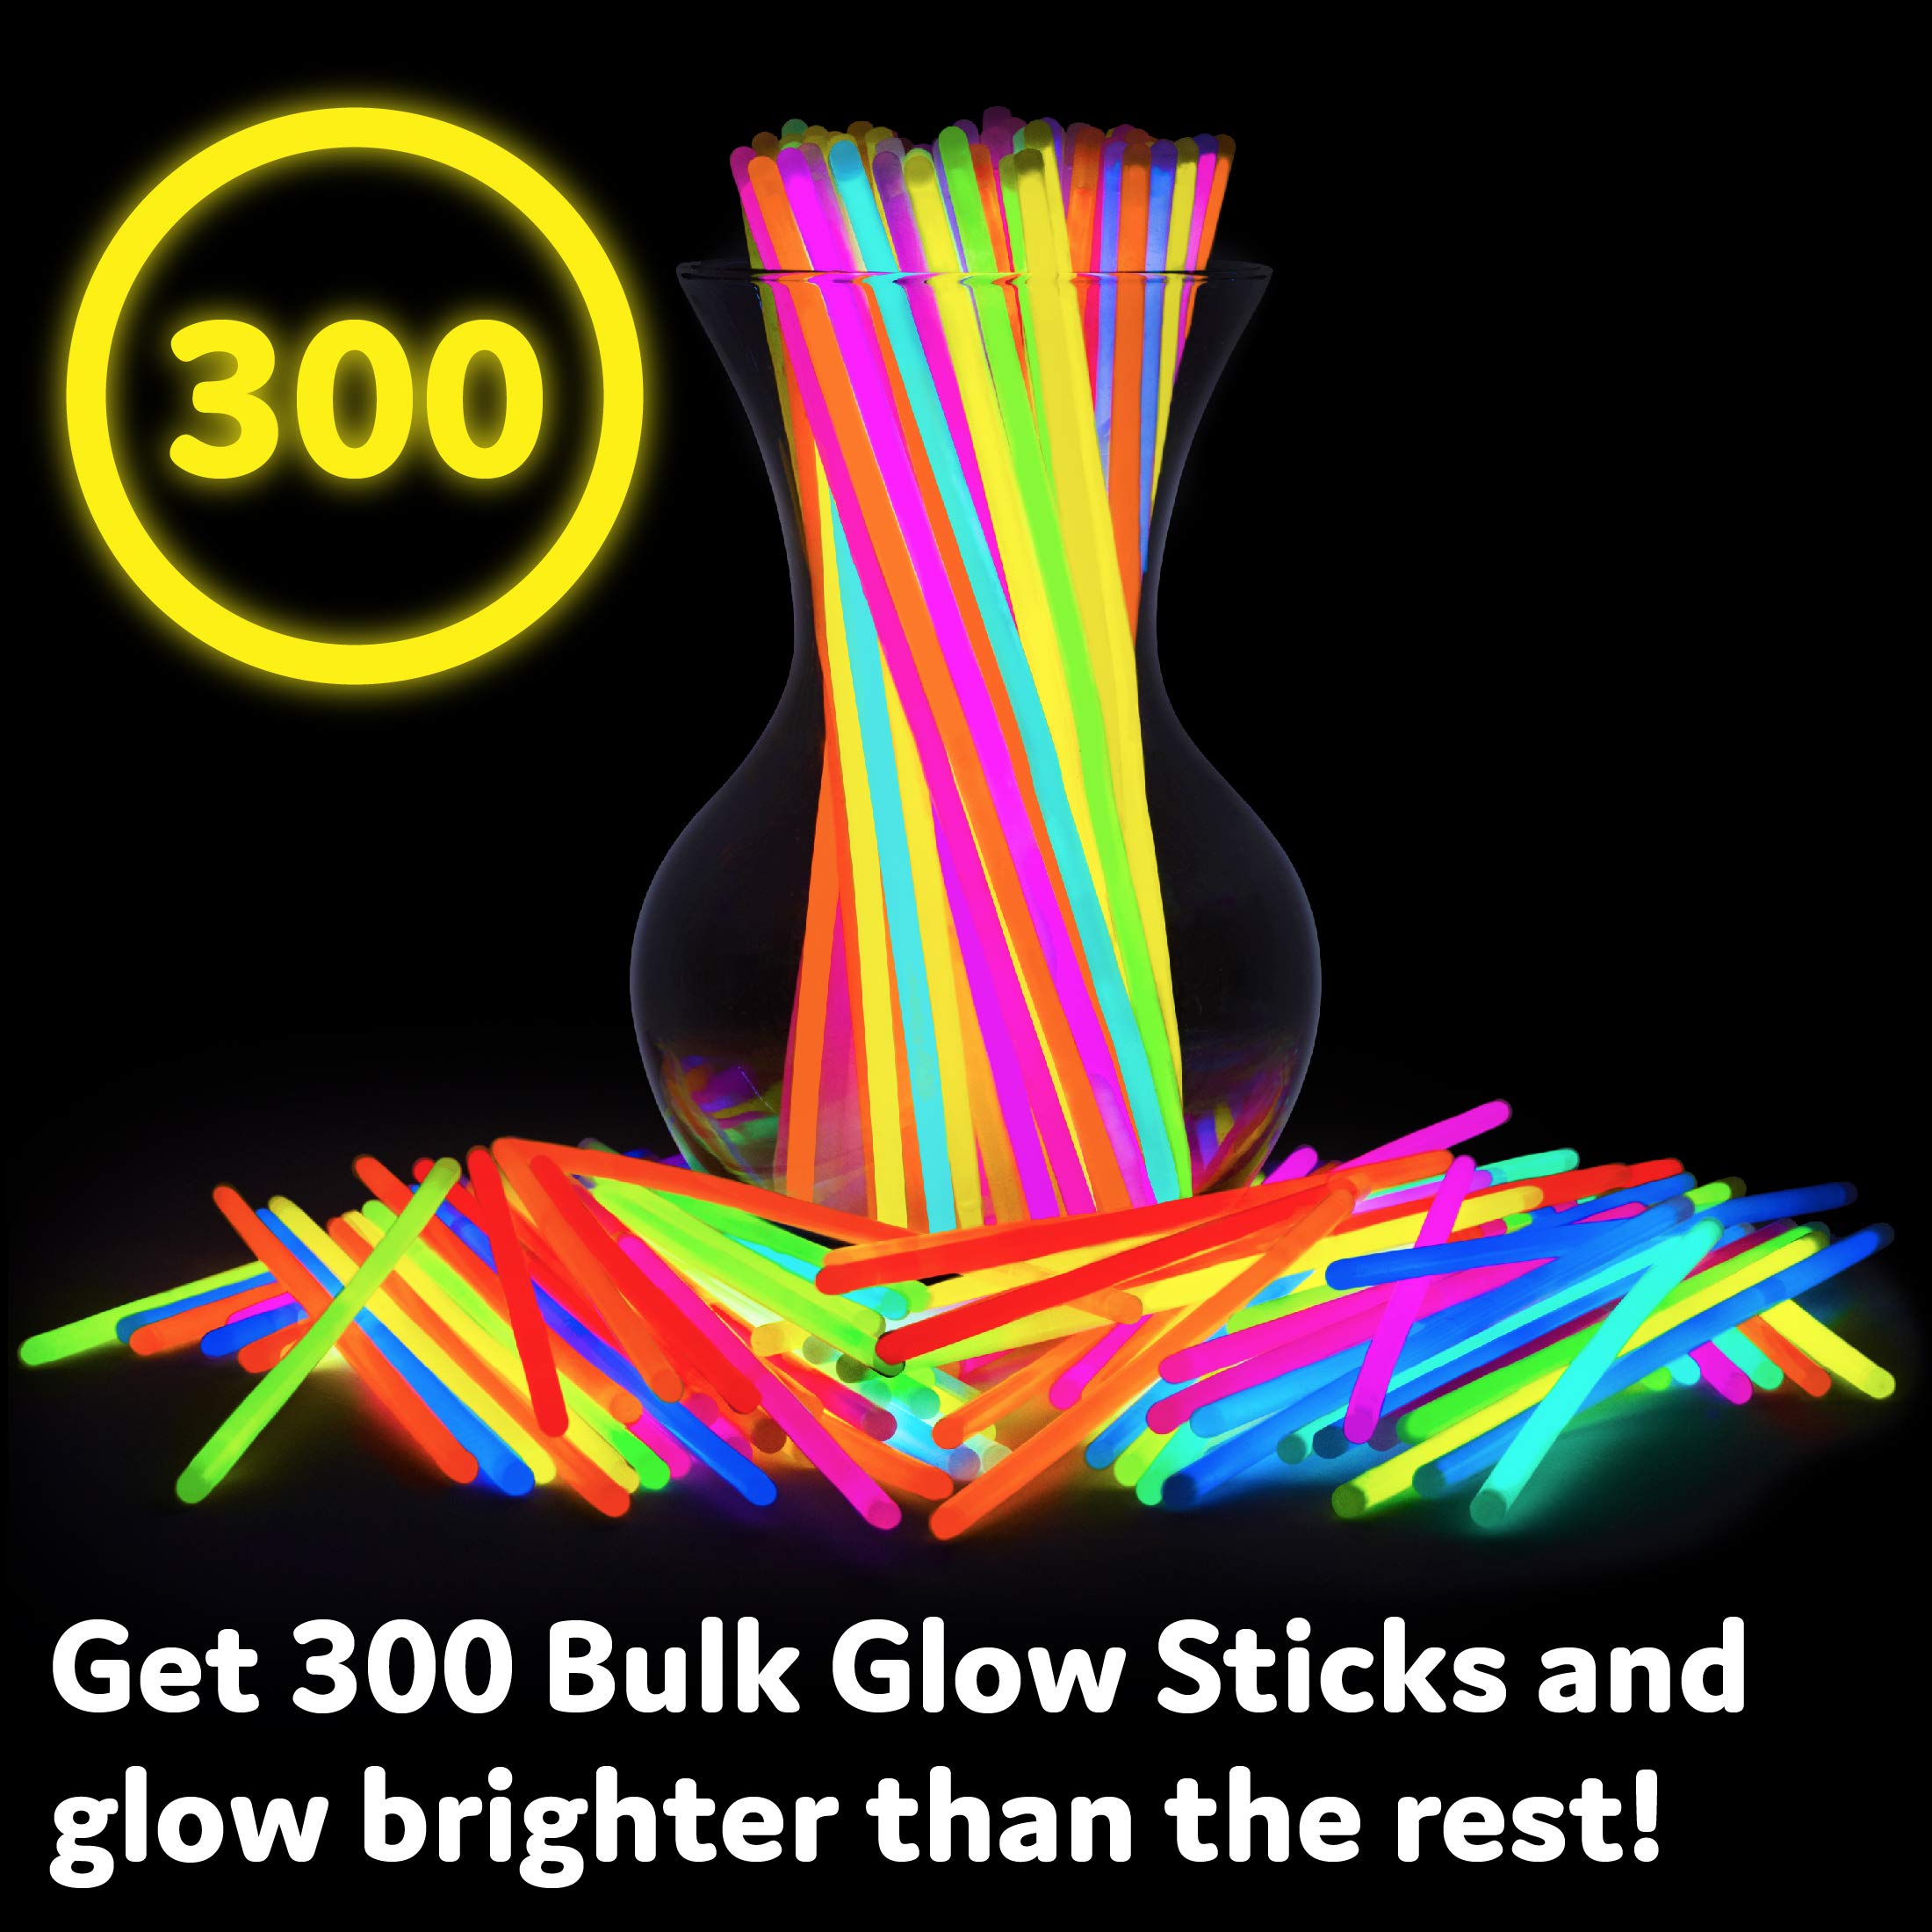 PartySticks Glow Sticks Party Supplies 200pk - 8 Inch Glow in the Dark Light Up Sticks Party Favors, Glow Party Decorations, Neon Party Glow Necklaces and Glow Bracelets with Connectors